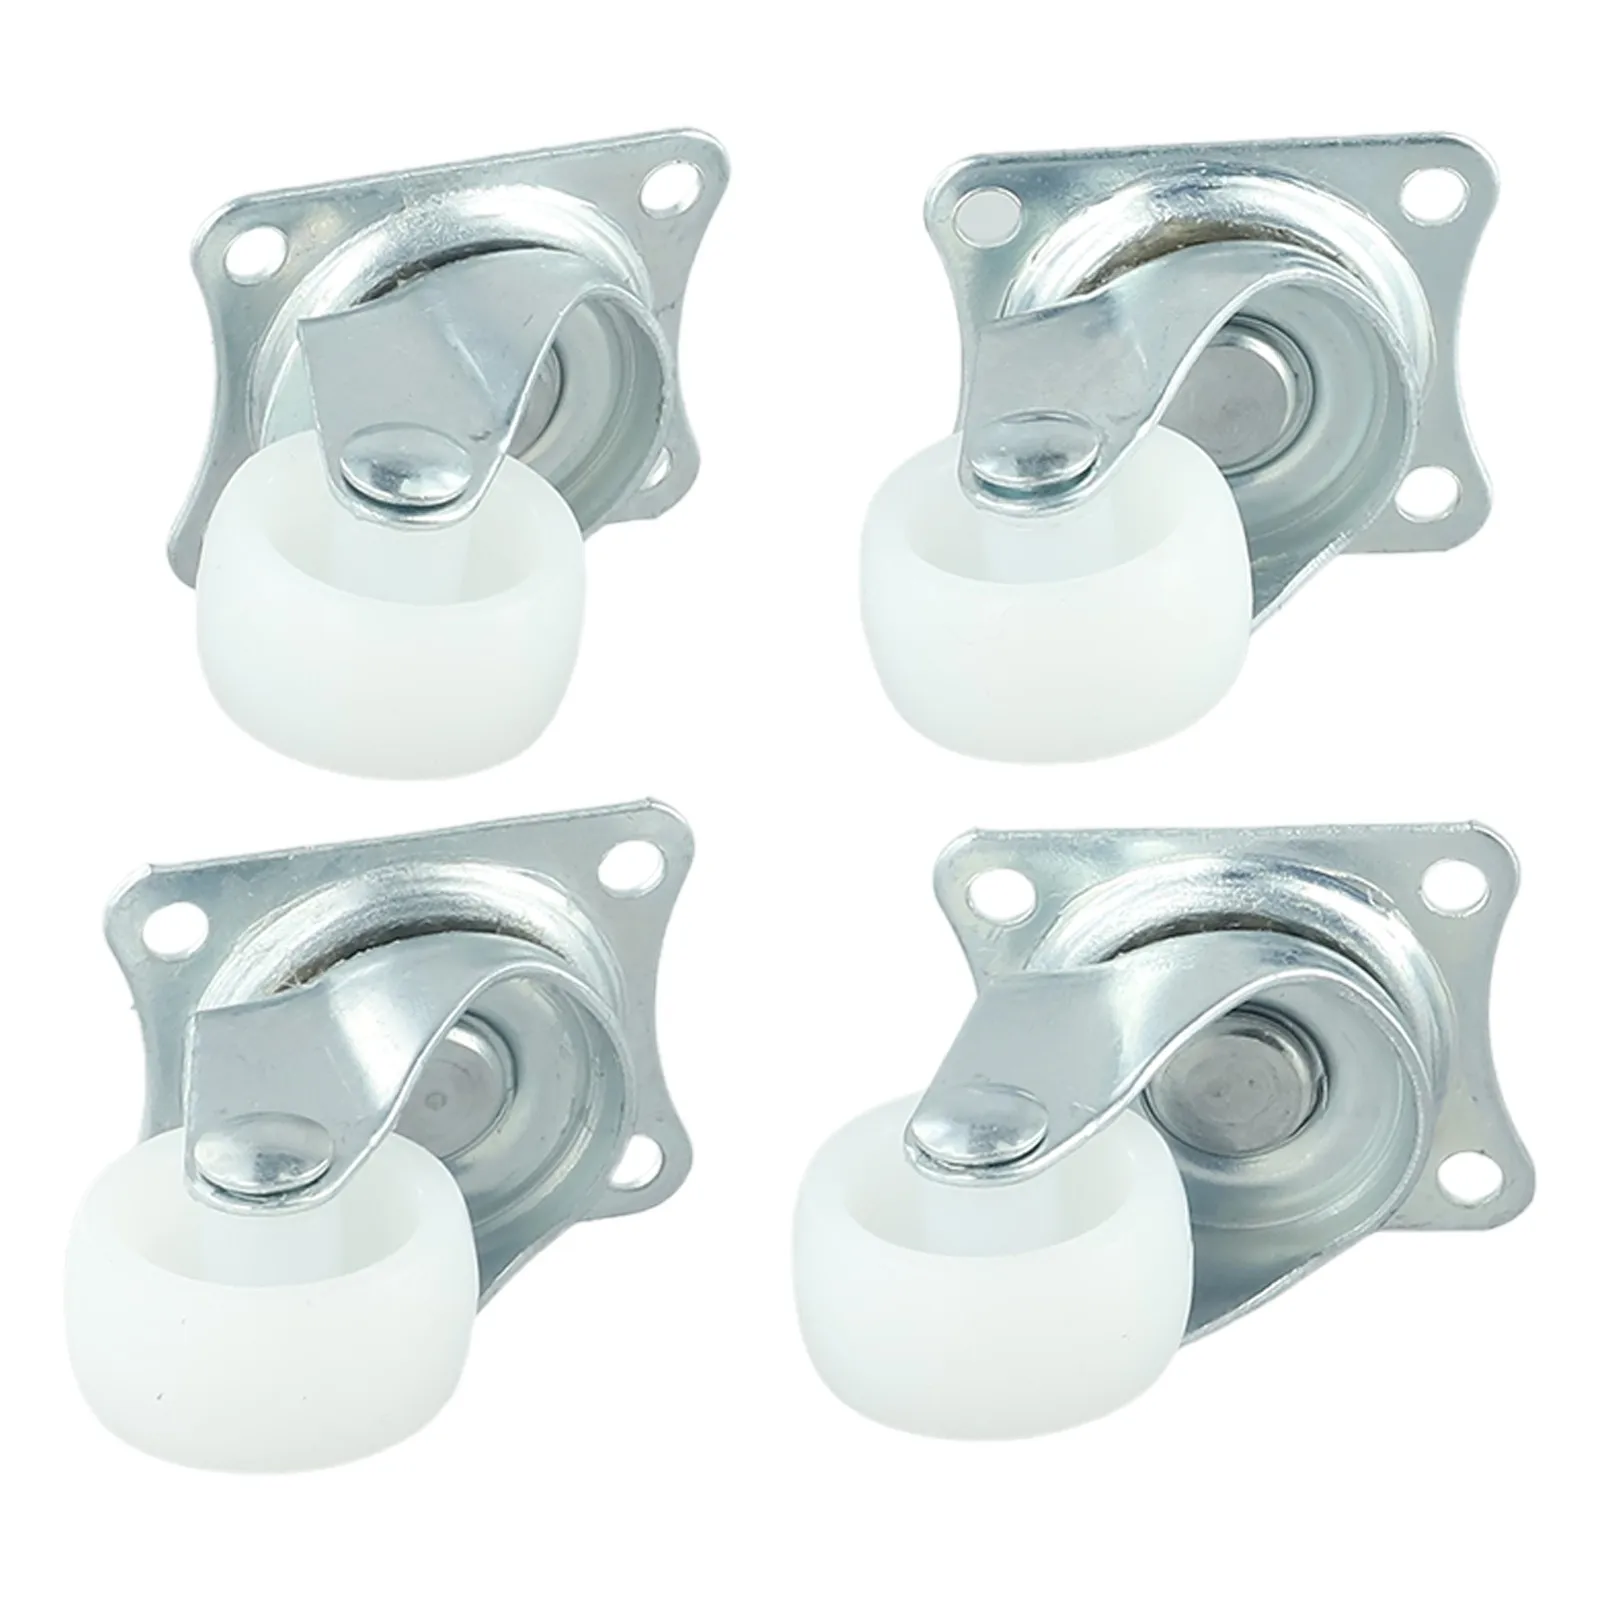 

Parts Swivel Casters 250G 4/12pcs Bearing Wheels Mount Ball Stroller Wheel White/silver With Rubber Homes Durable